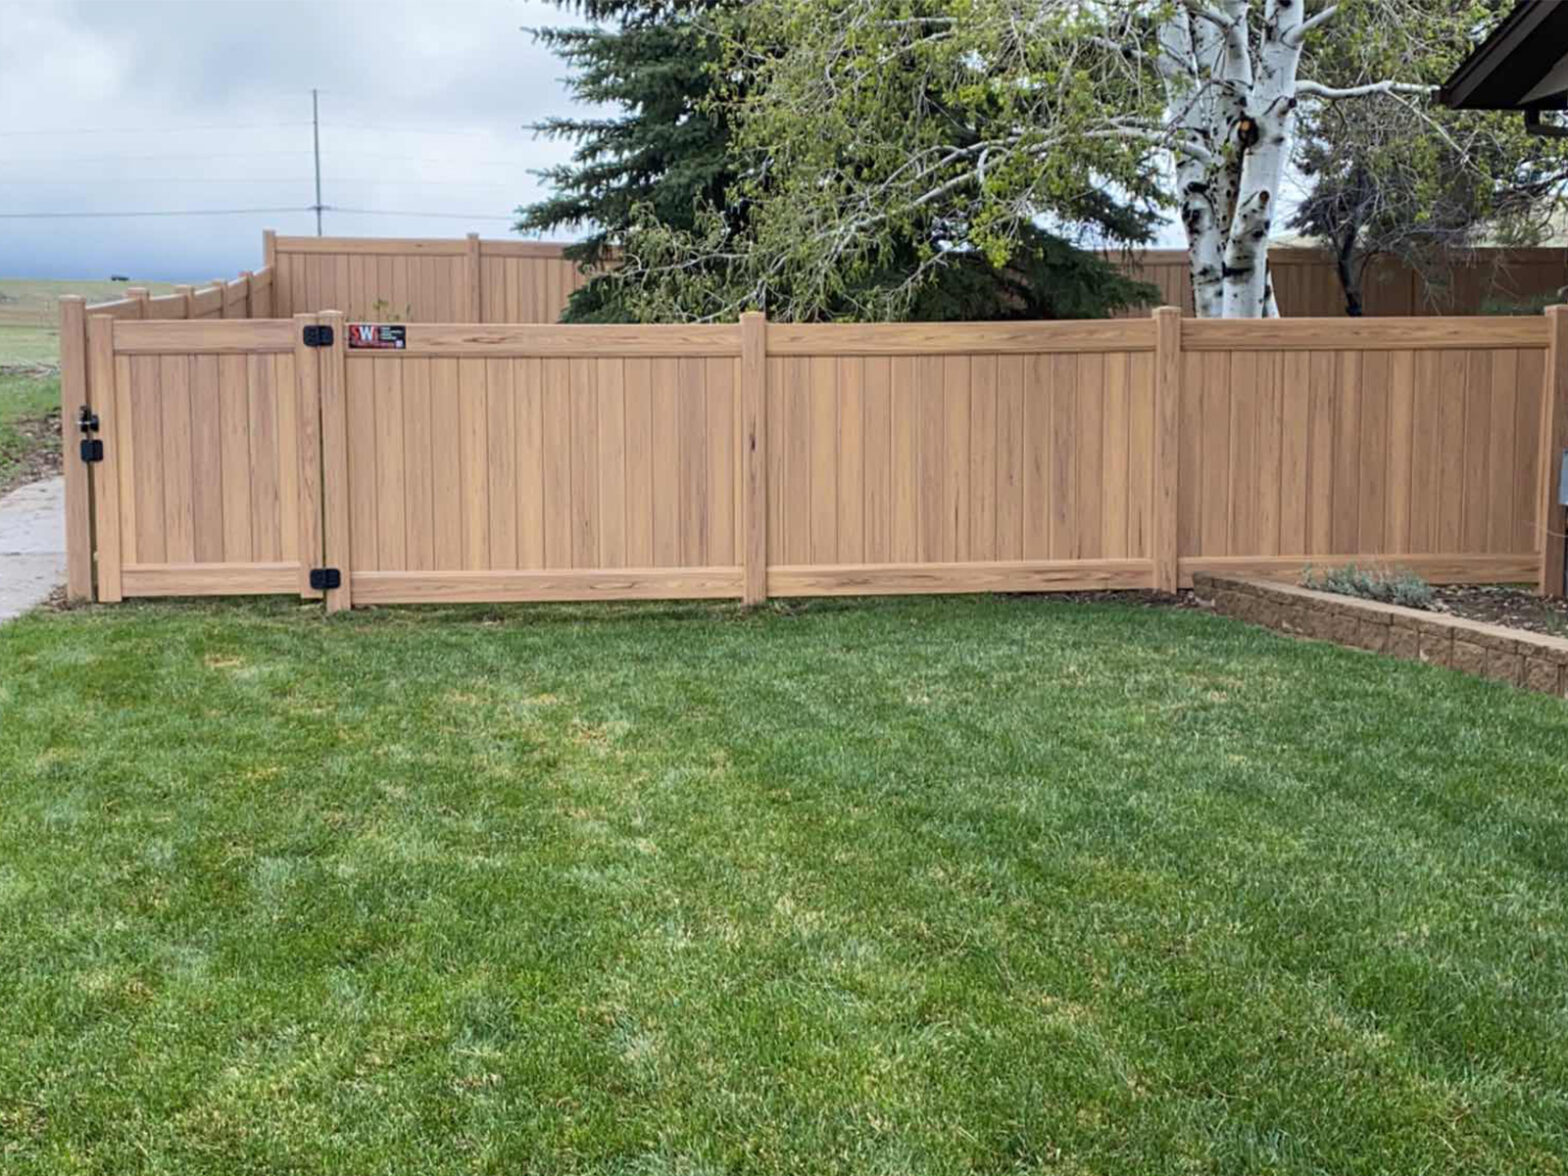 Photo of a Casper Wyoming residential fence